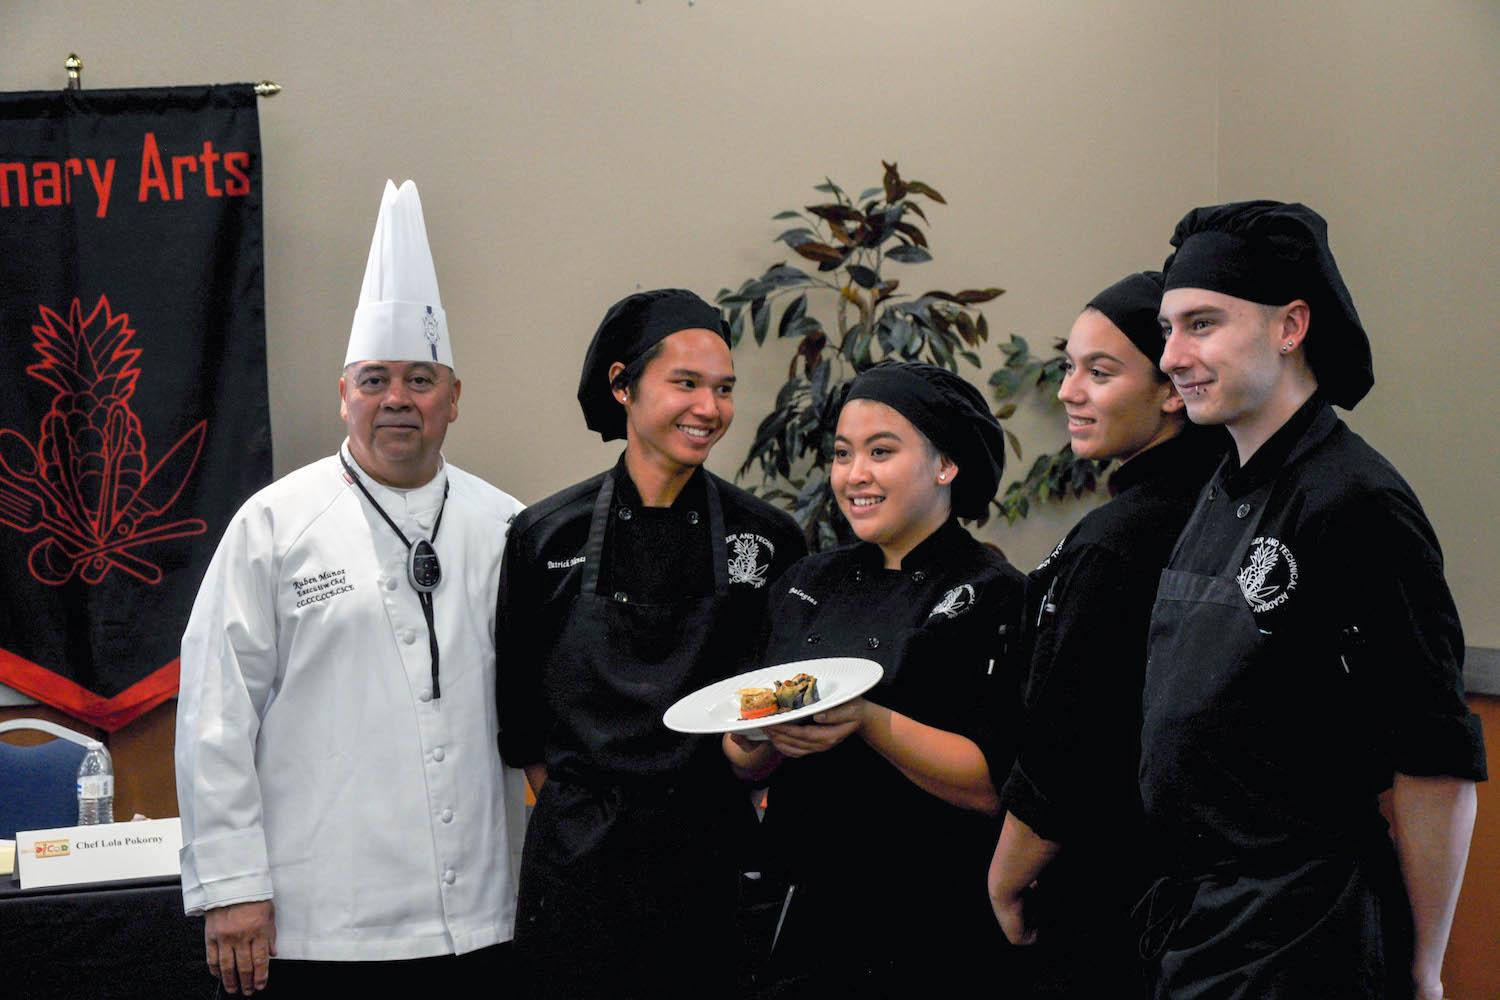 VIDEO: Culinary Arts students compete in Diced competition